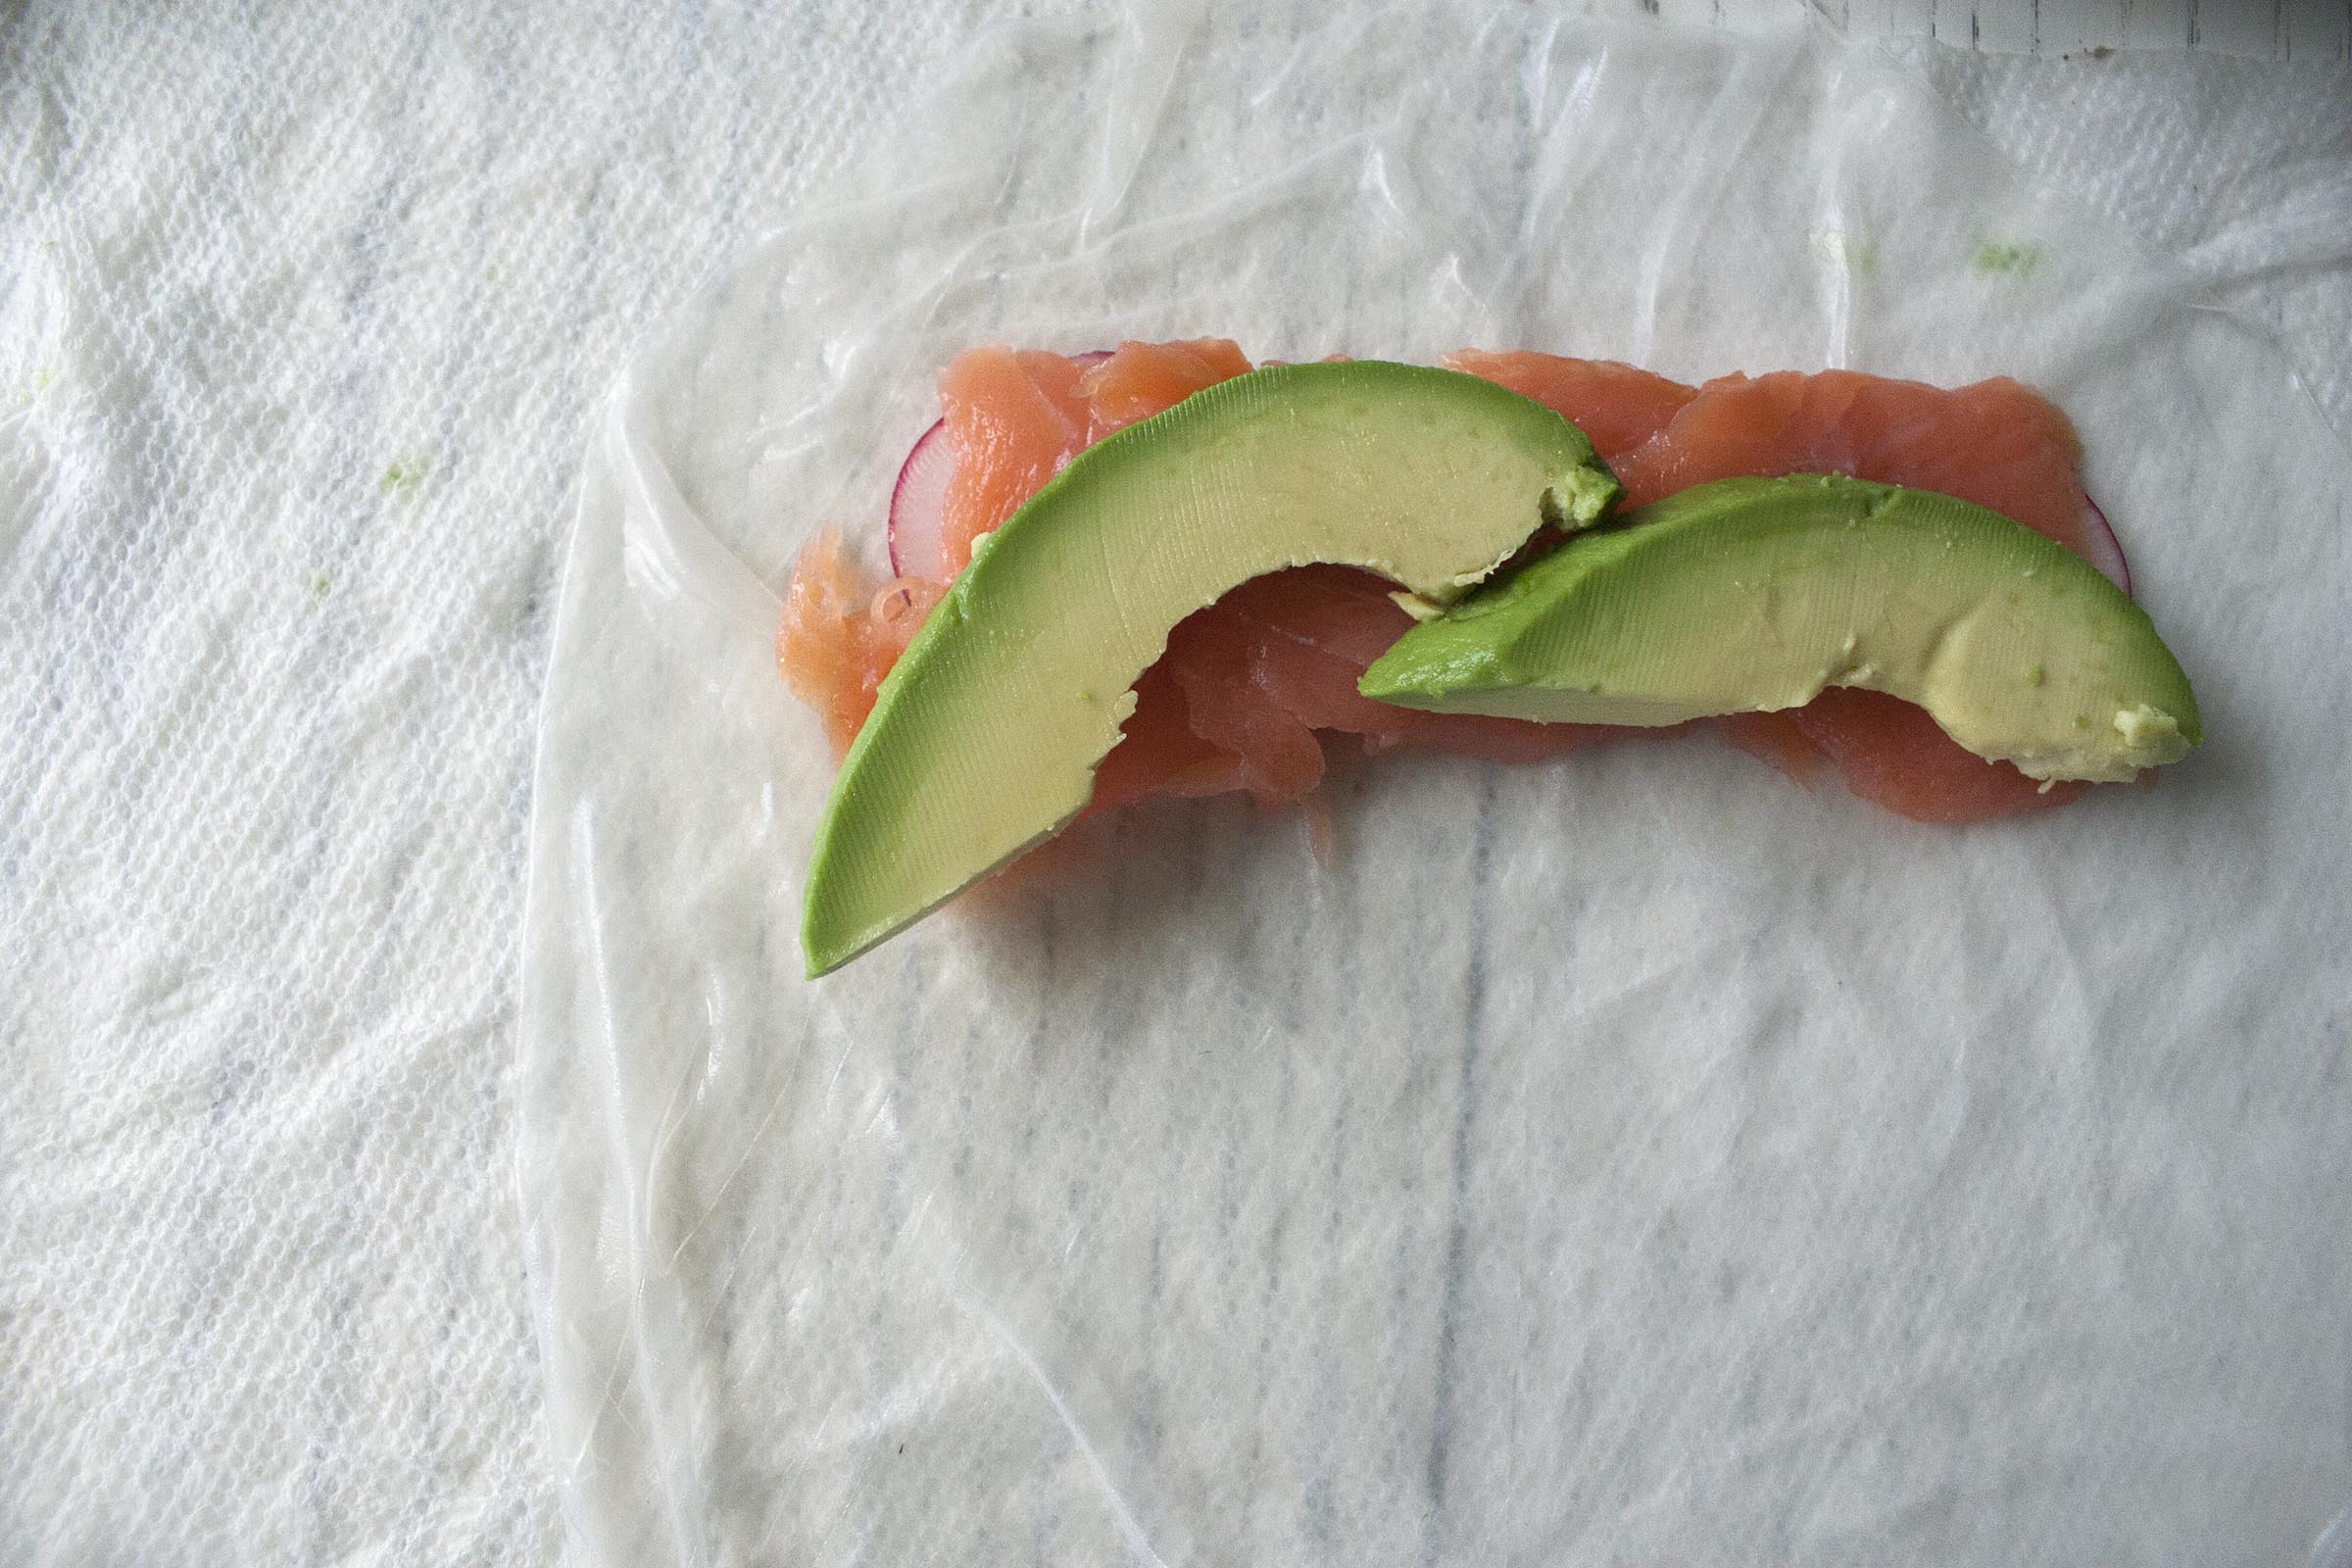 Assembling the Avocado and Smoked Salmon Summer Roll